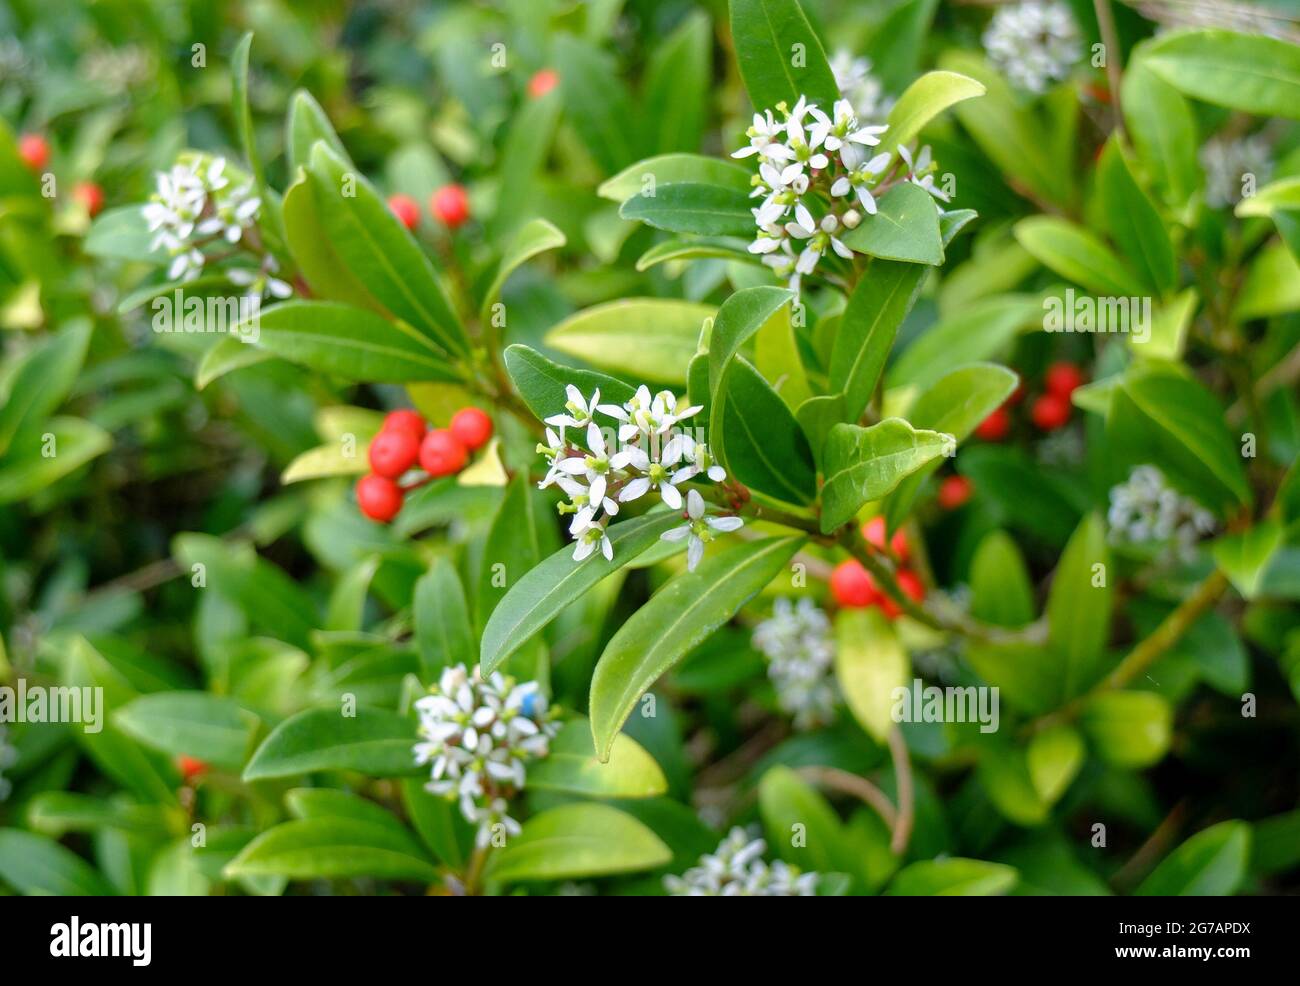 The Japanese fruit skimmia (Skimmia japonica) with fruits and flowers Stock Photo